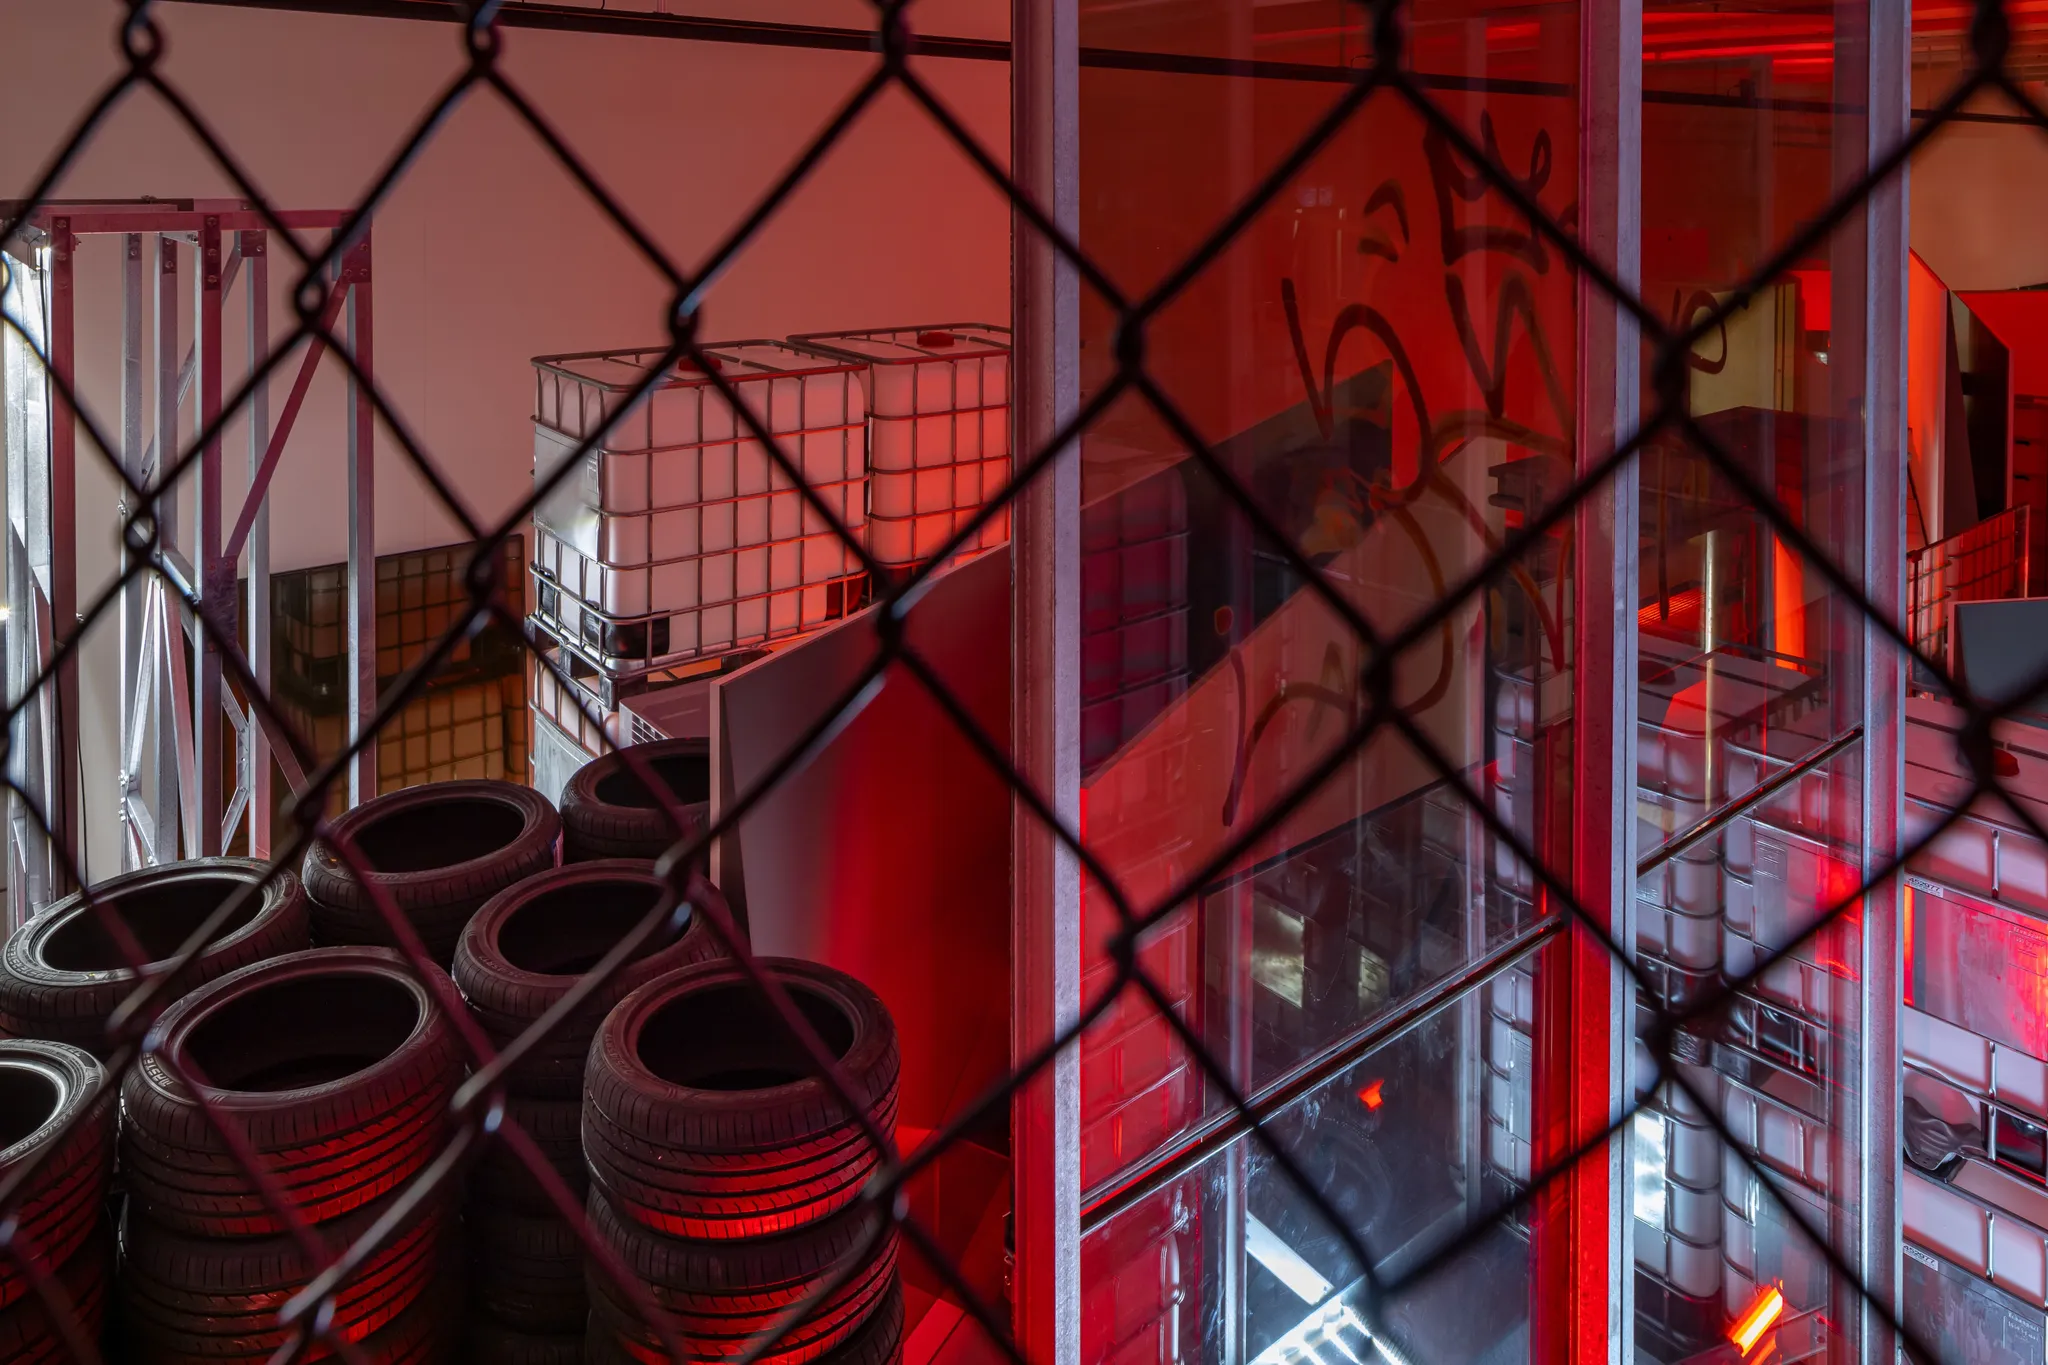 View from above of the exhibition through a metal fence: car tires, large glass plates with graffiti's, stacked water tanks surrounded by red light